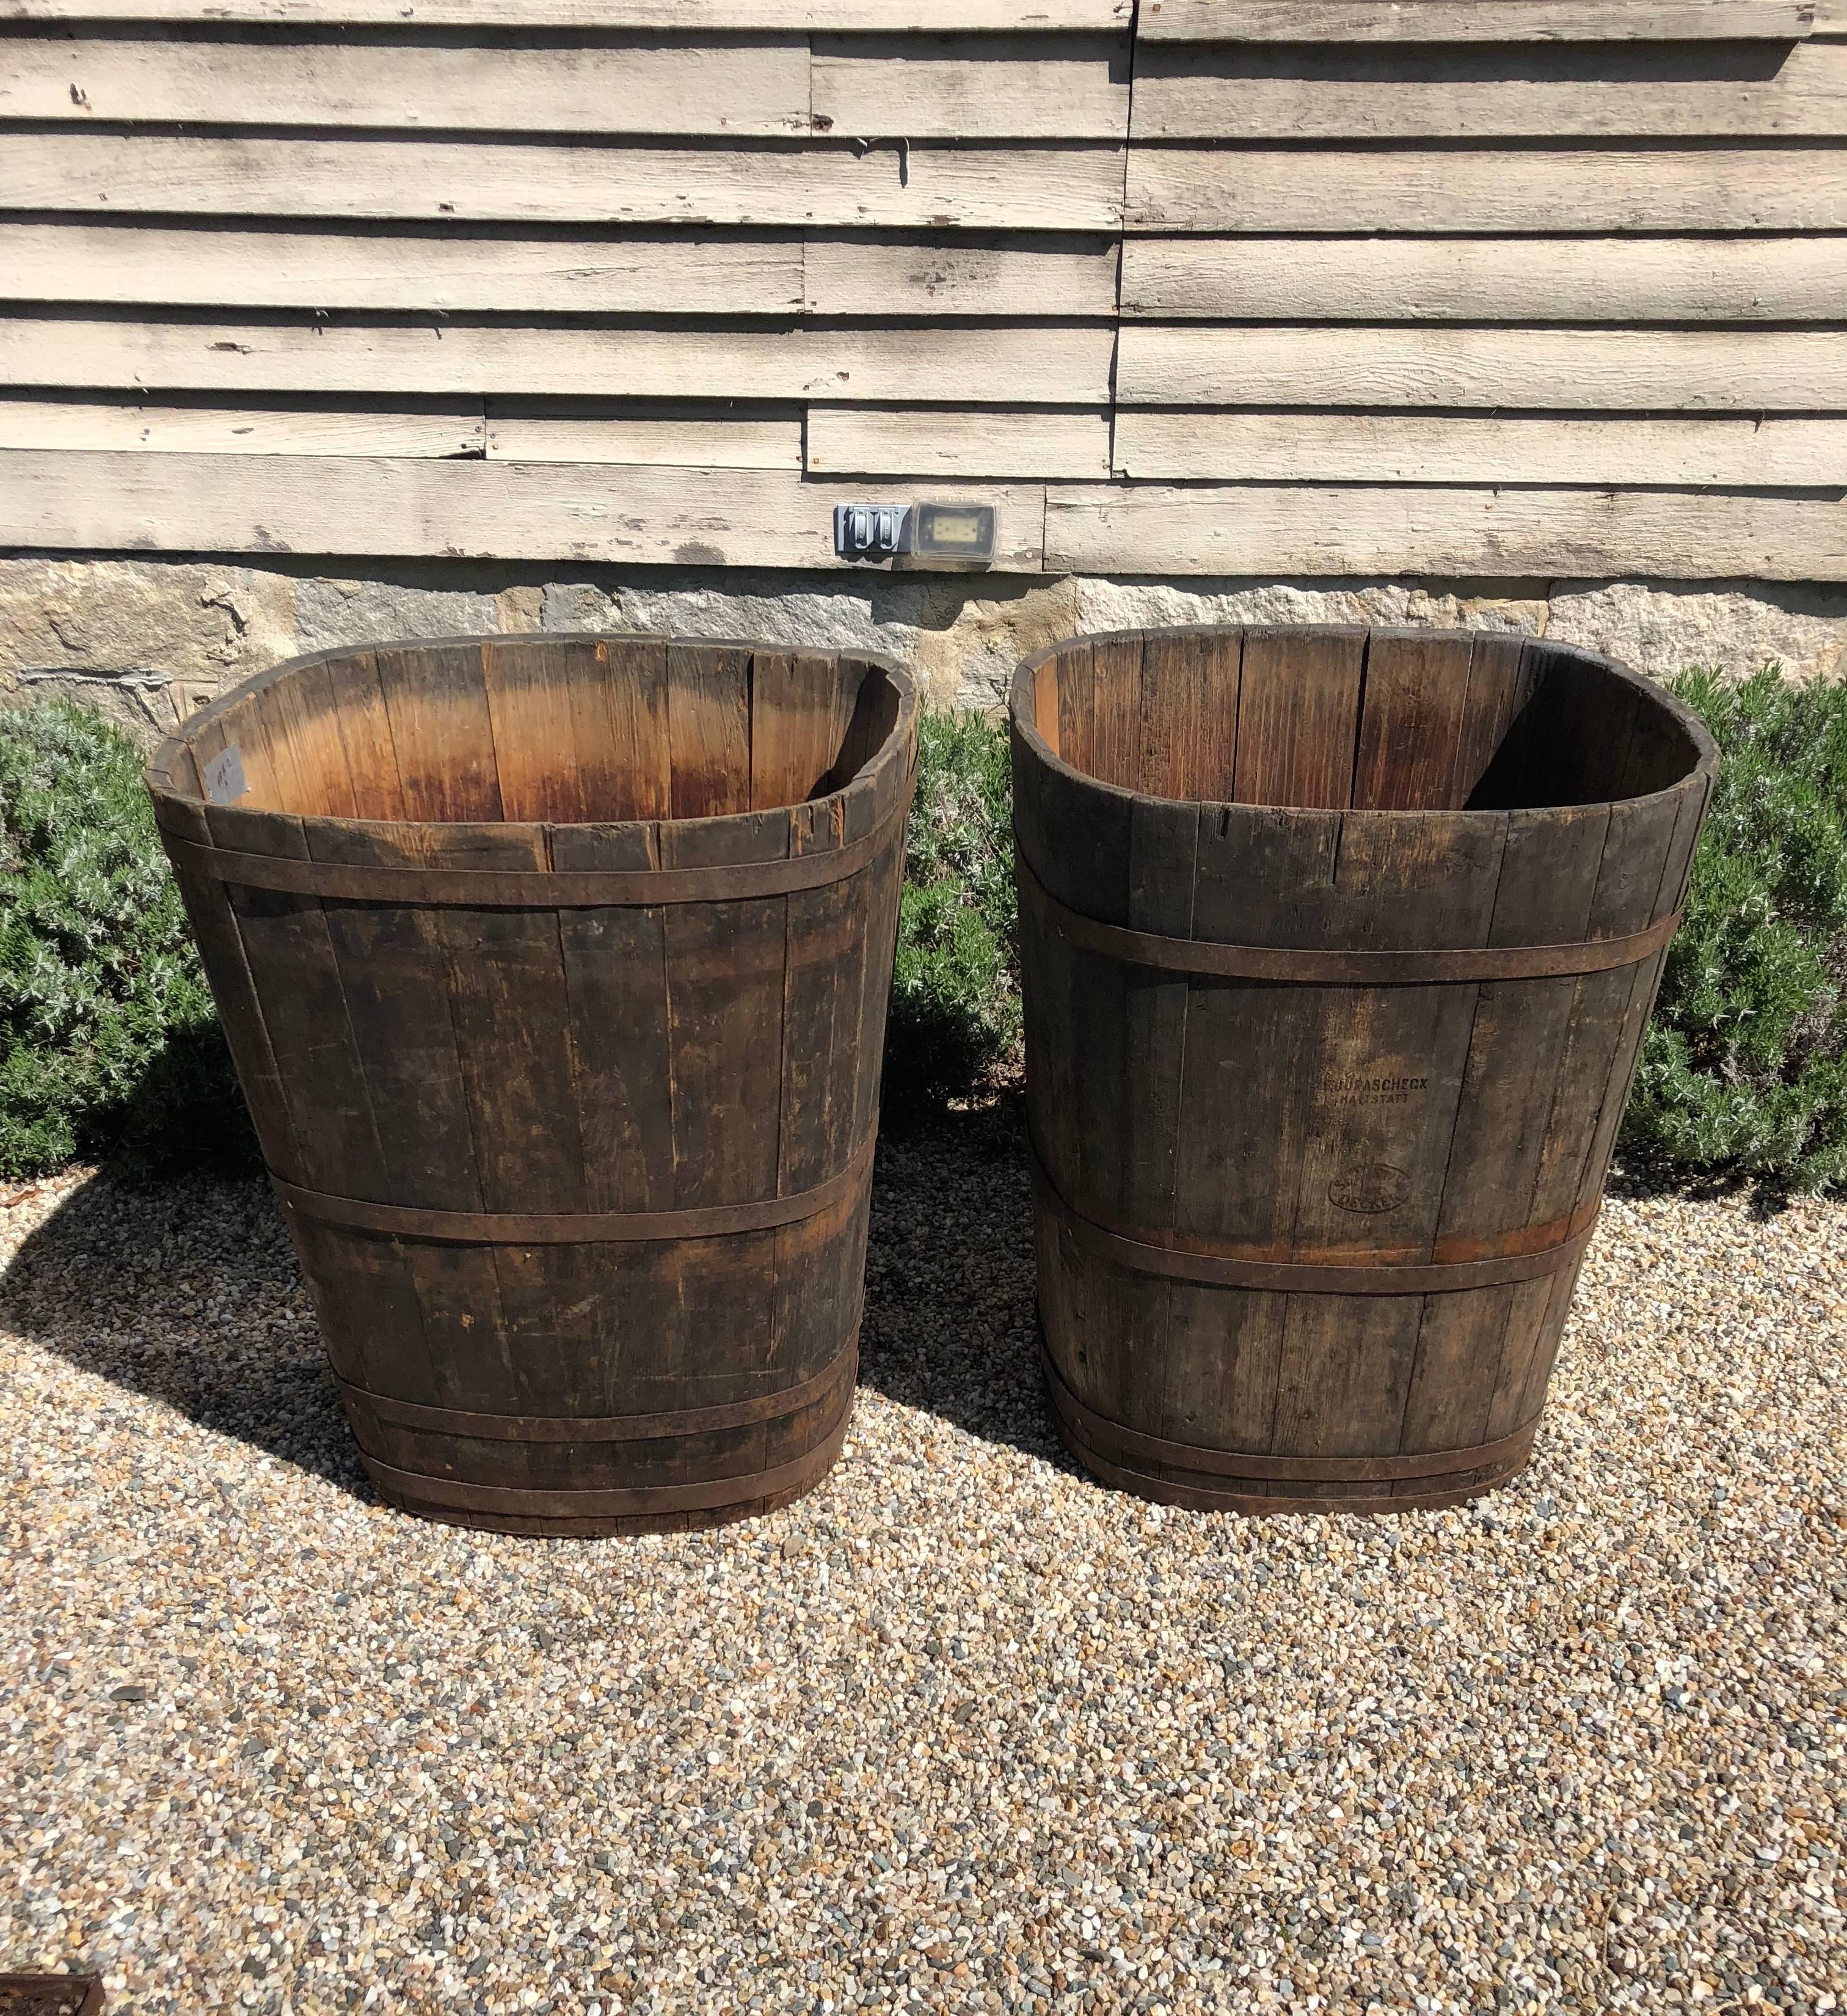 On one of our recent buying trips, we were fortunate enough to source four pairs of very large wooden tubs that were used as Master Collection Vessels for the grape harvest in Alsace. At least one in each pair is stamped by its maker, 